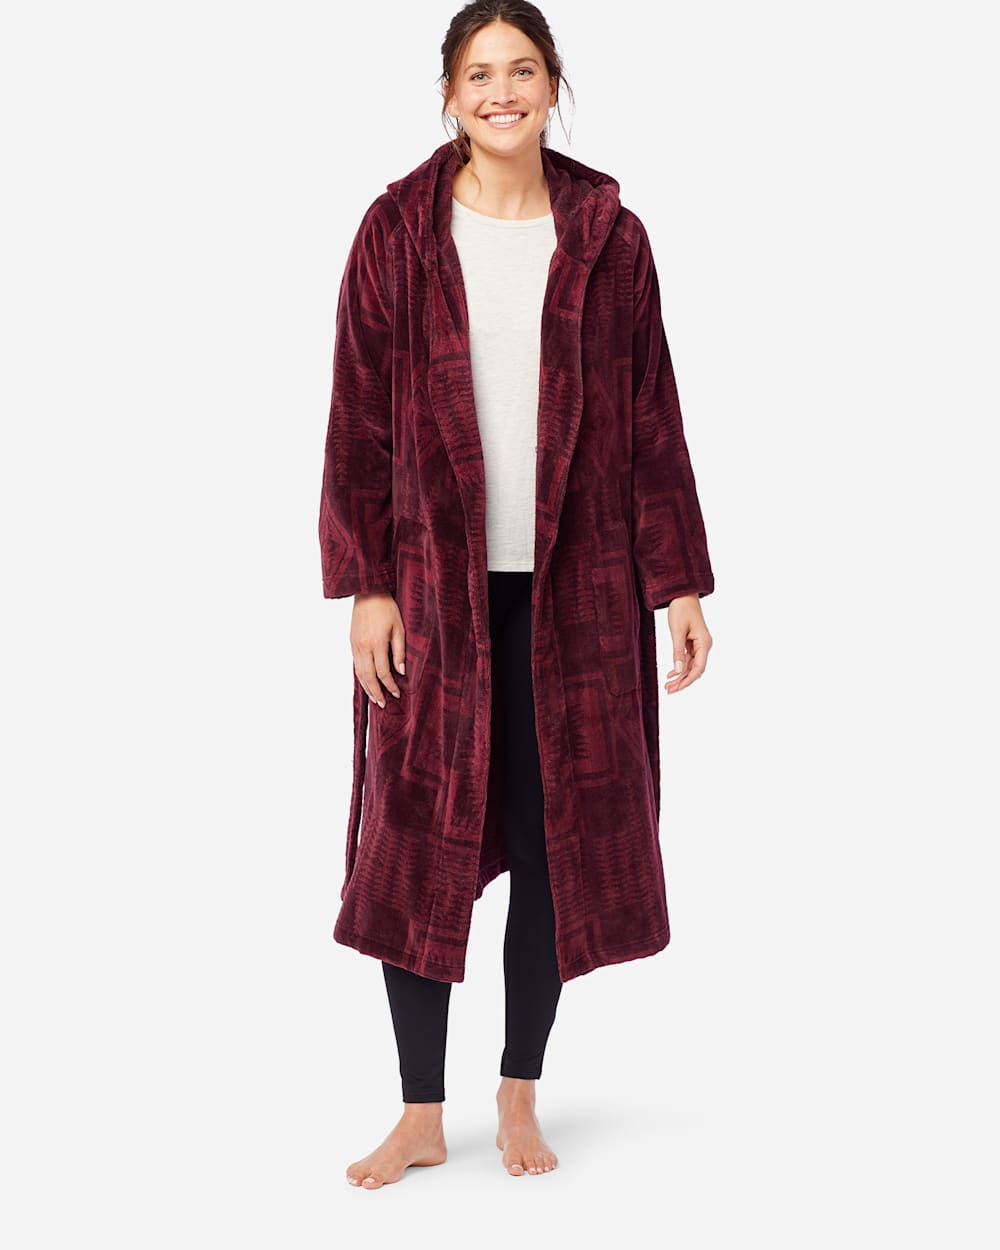 ALTERNATE VIEW OF WOMEN'S JACQUARD TERRY ROBE IN BURGUNDY HARDING image number 4